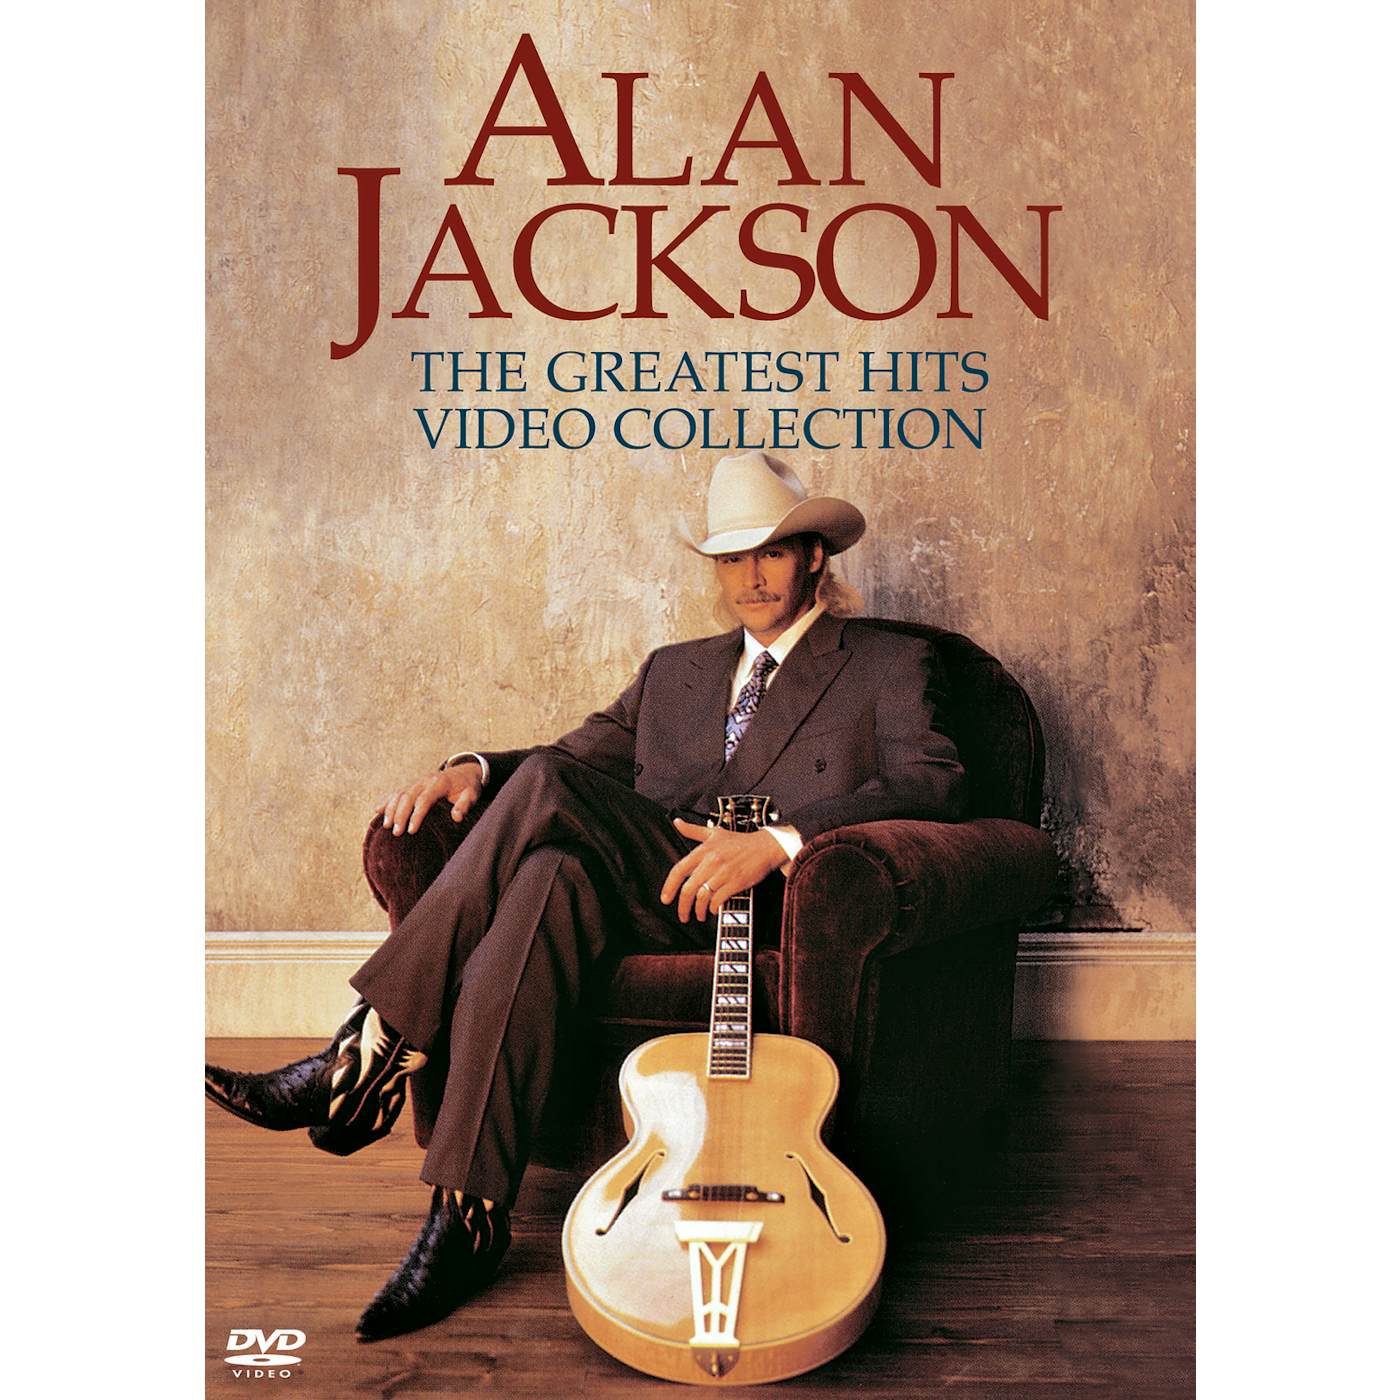 Alan Jackson GREATEST HITS VIDEO COLLECTION DVD